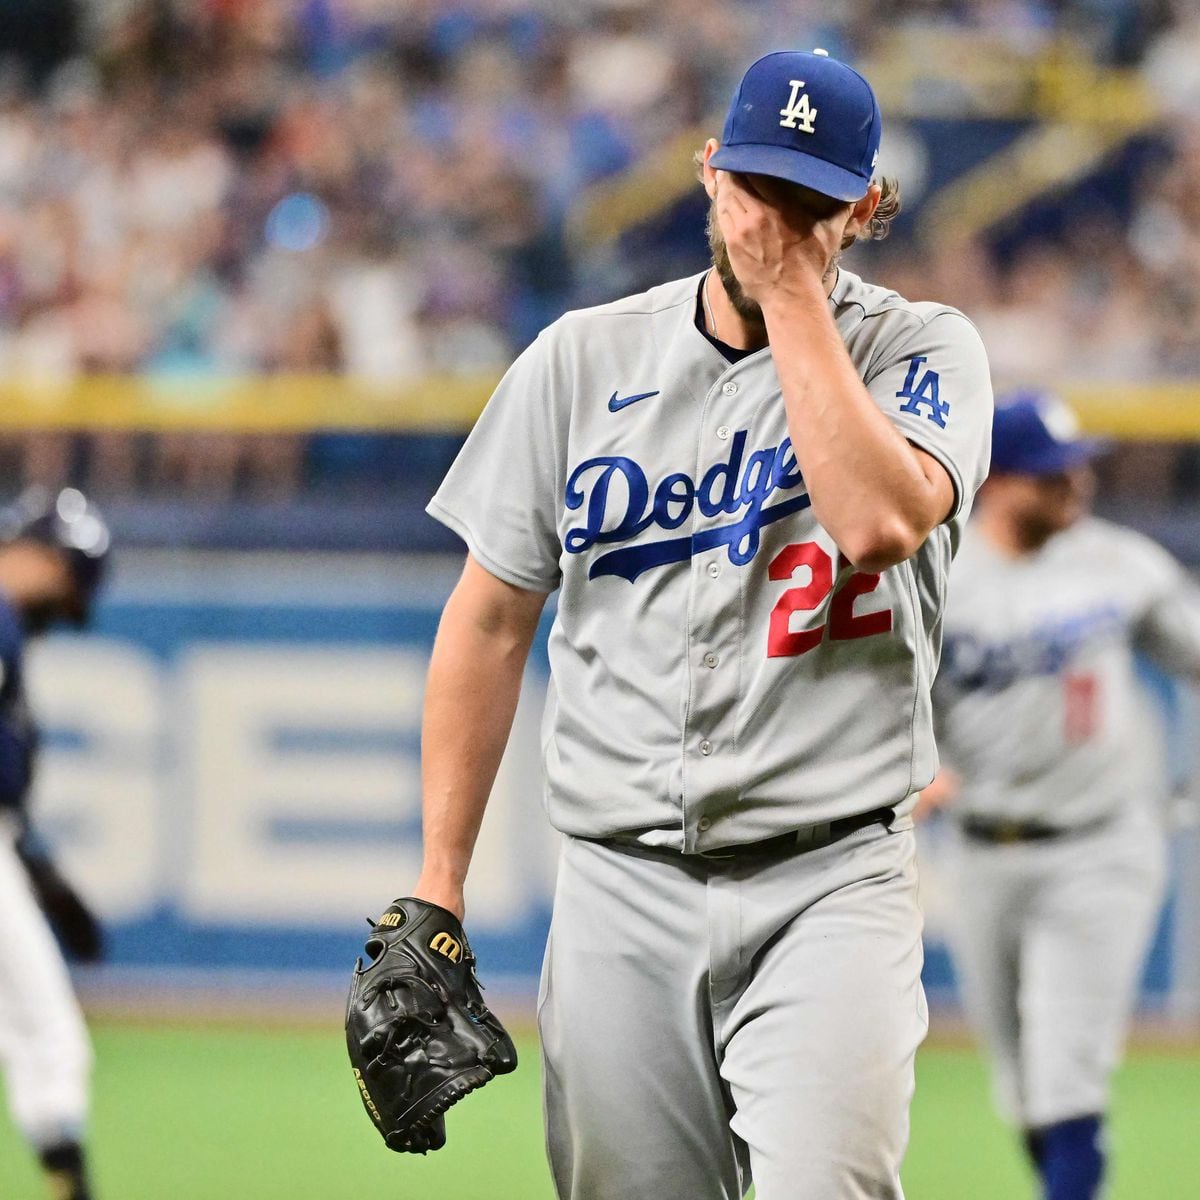 Los Angeles Dodgers caught in the middle of Pride vs Catholic